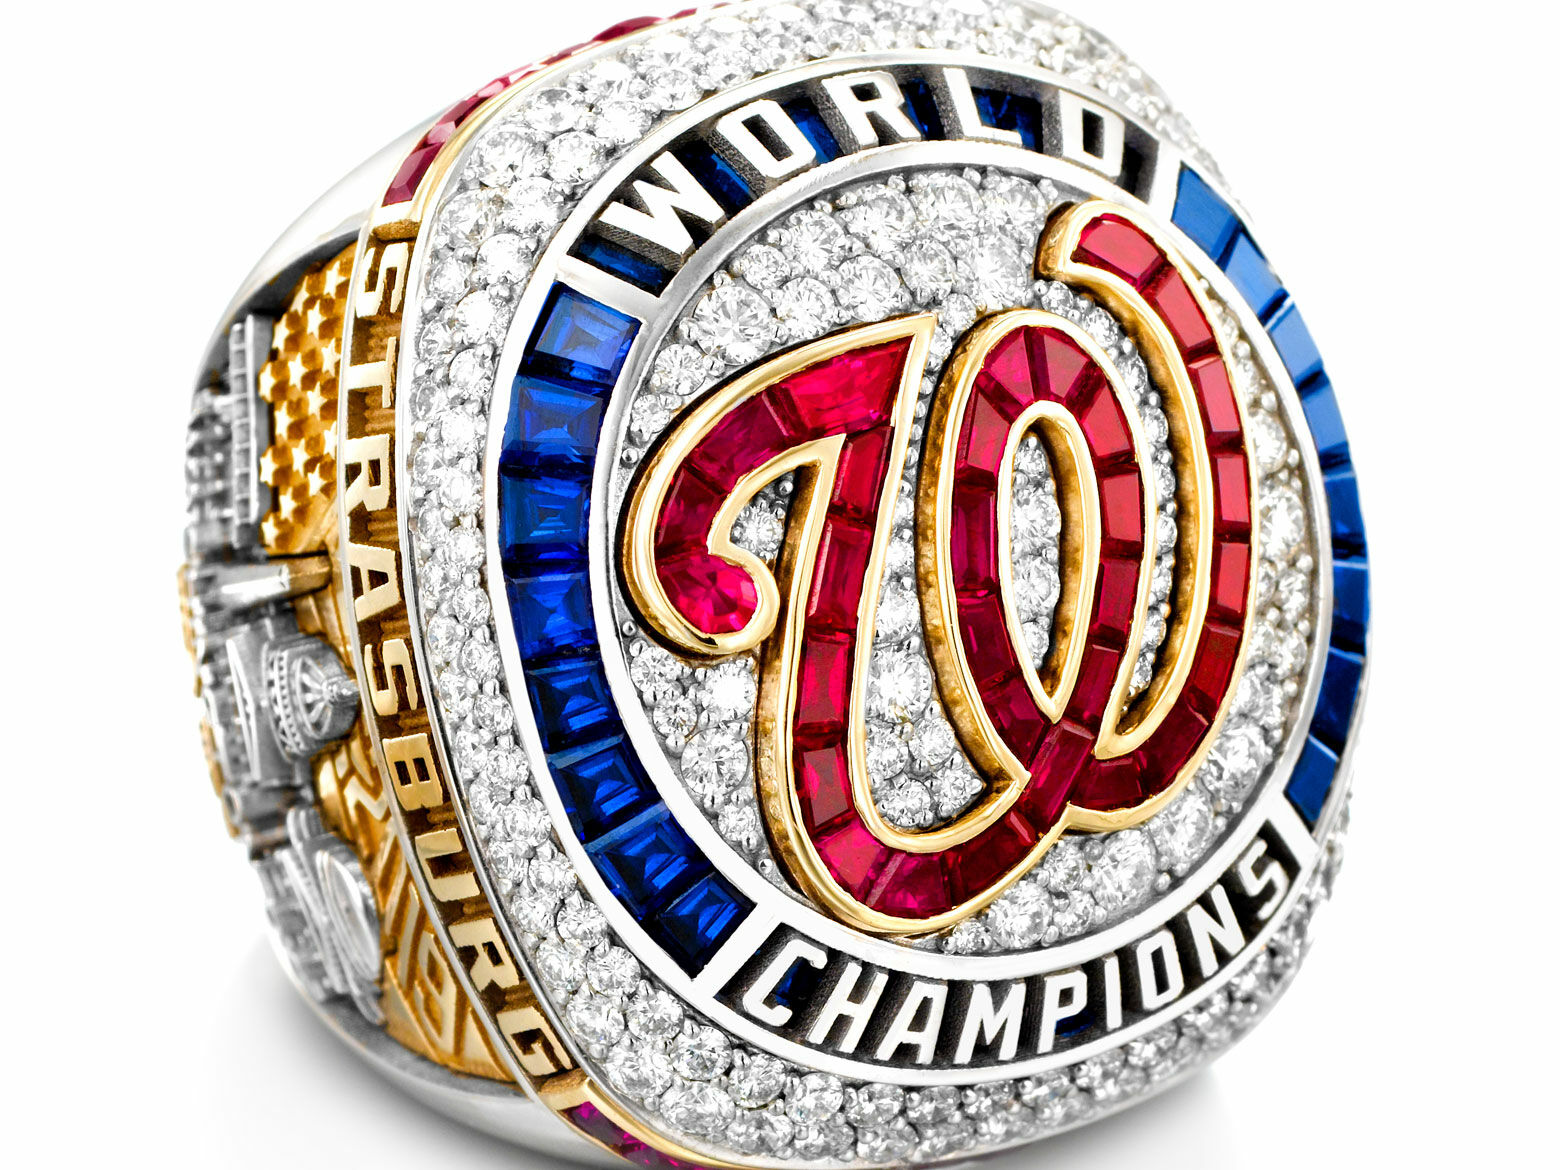 Braves World Series ring pictures what does it look like  11alivecom